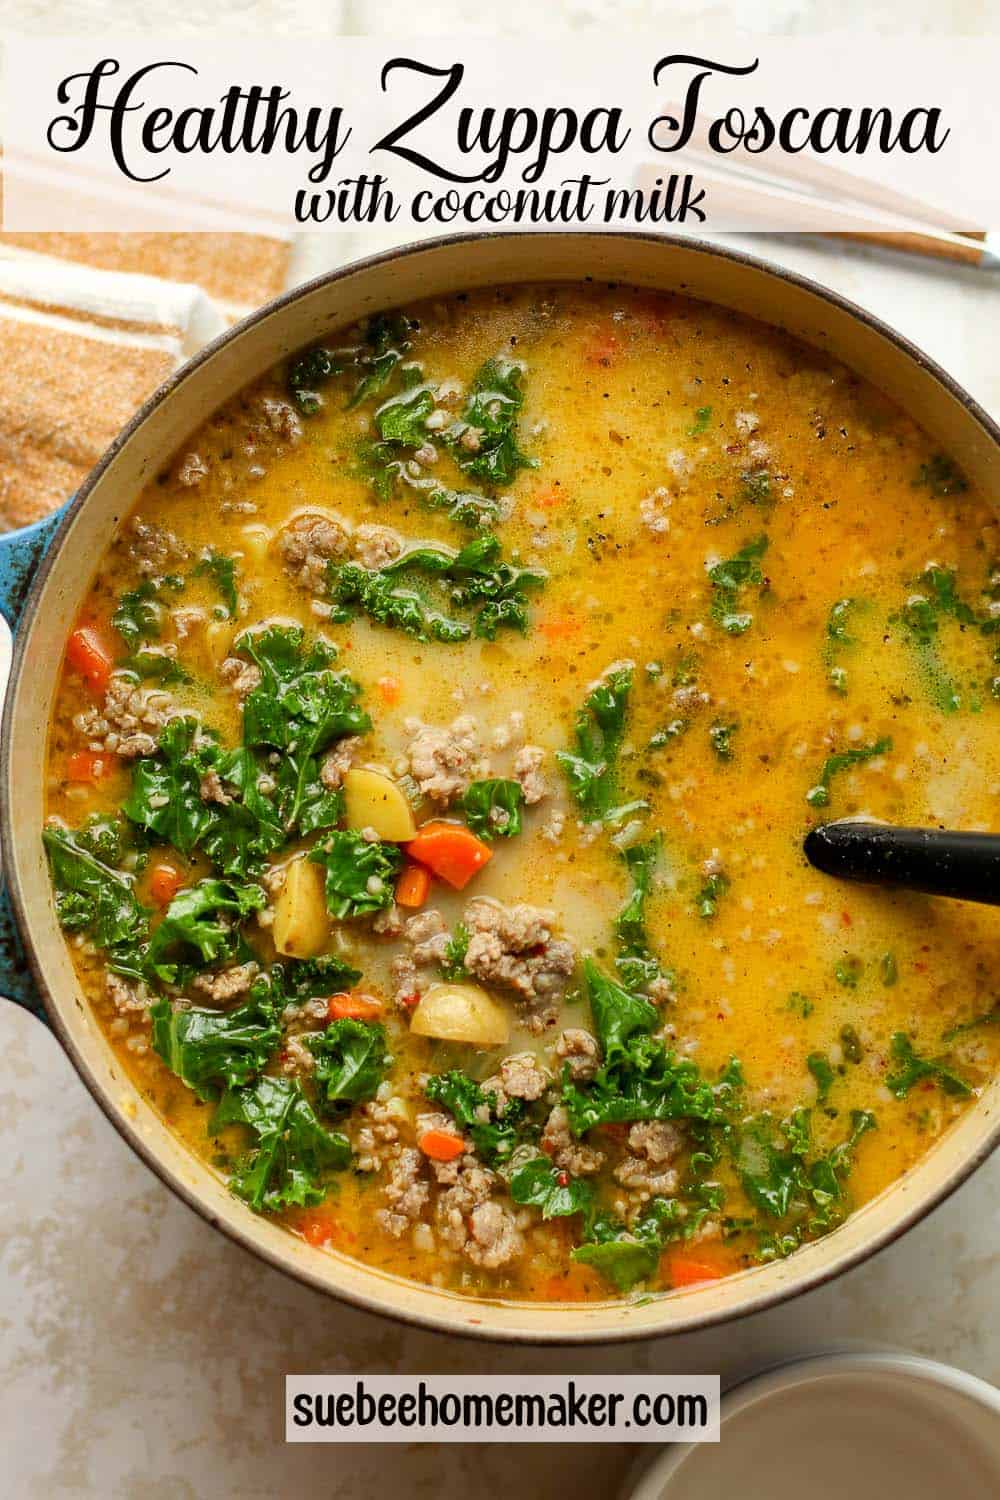 A large pot of healthy Zuppa Toscana with coconut milk.